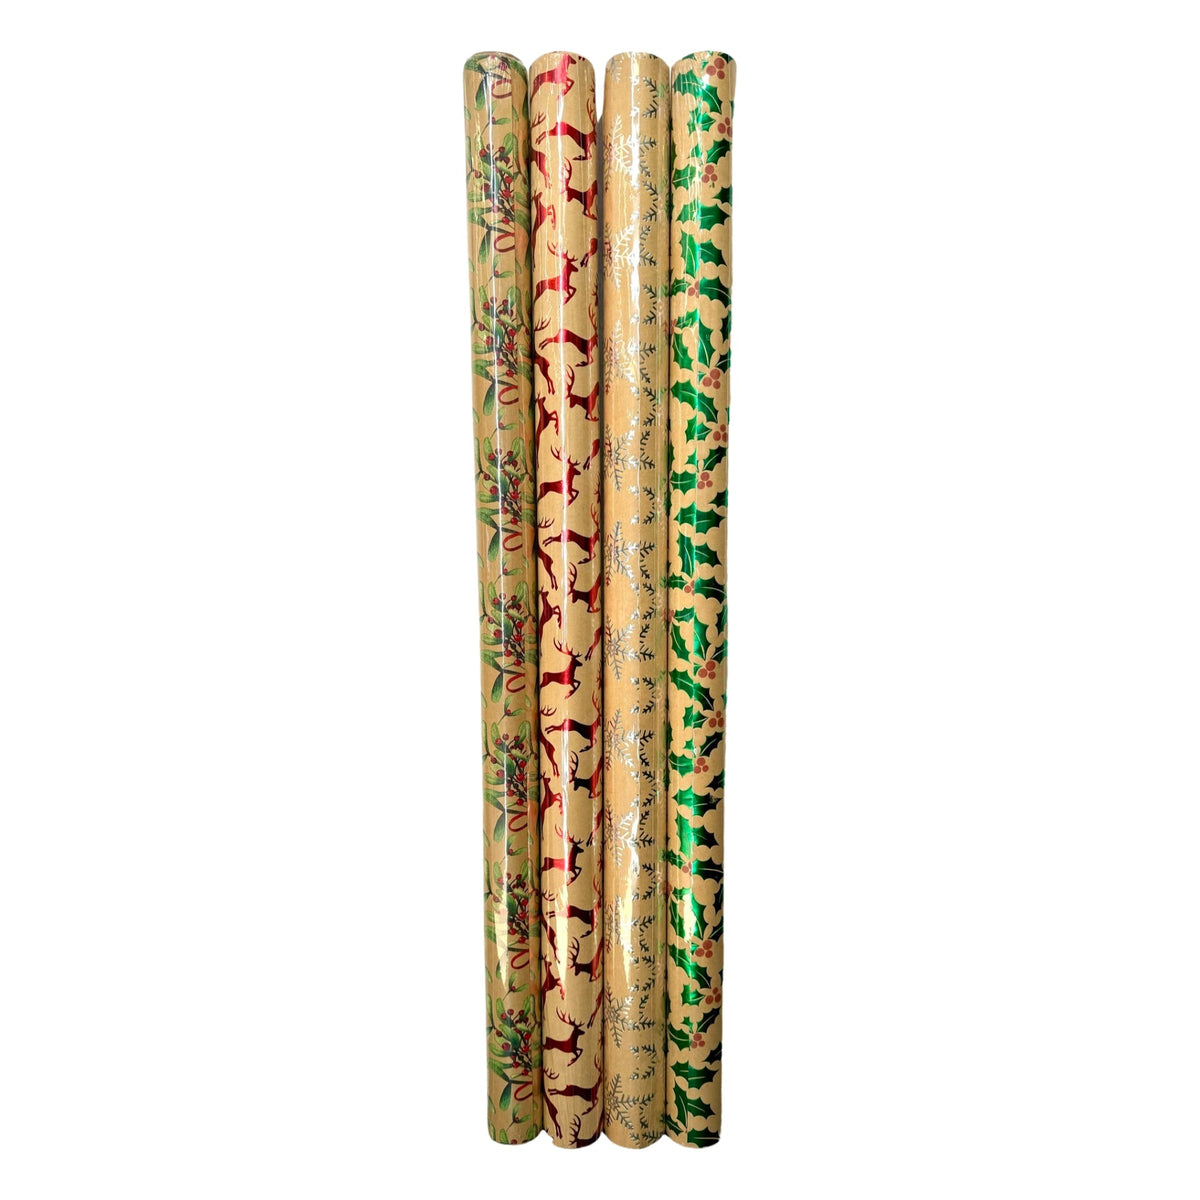 A-LINE Christmas Christmas Kraft Gift Wrap, Assortment, 30 x 96 Inches, 1 Count 882636993259